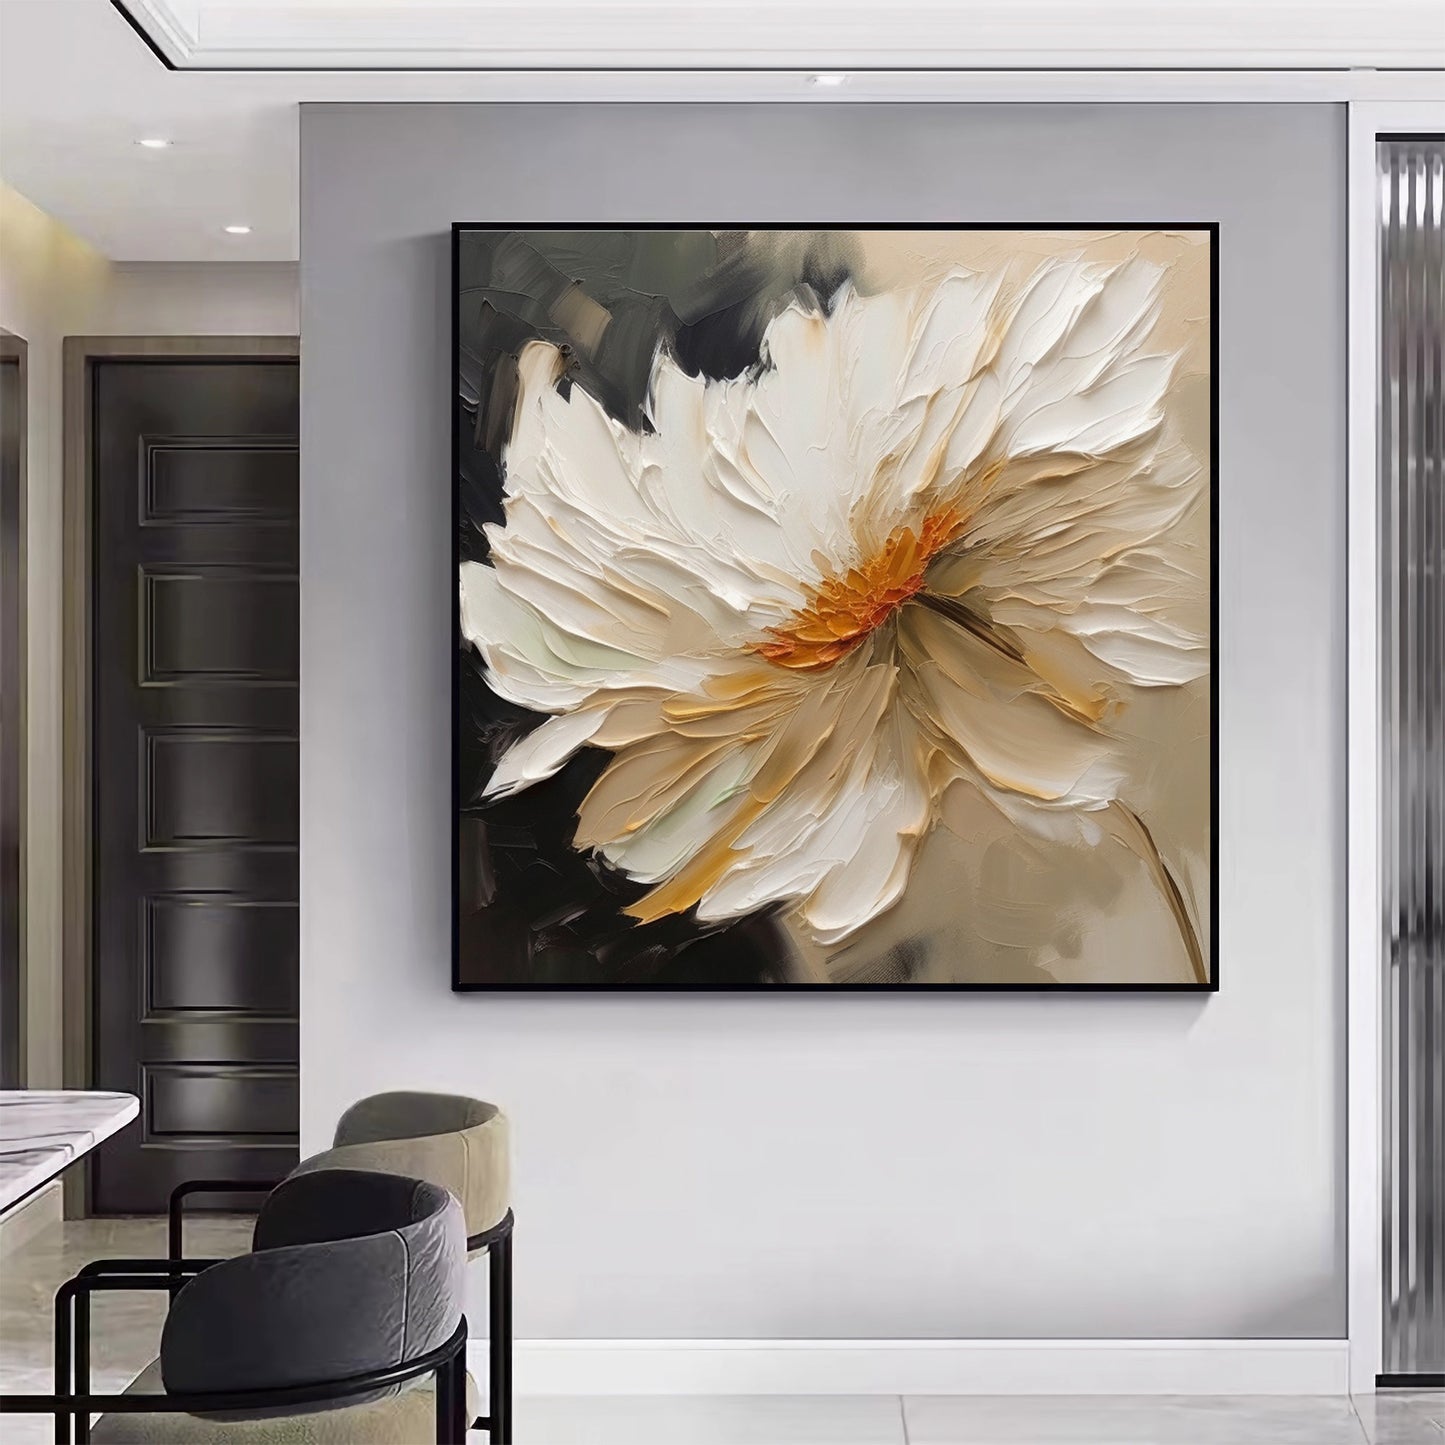 Texture Wall Decor Home Decor Gift Abstract Floral Painting F#BRT2378